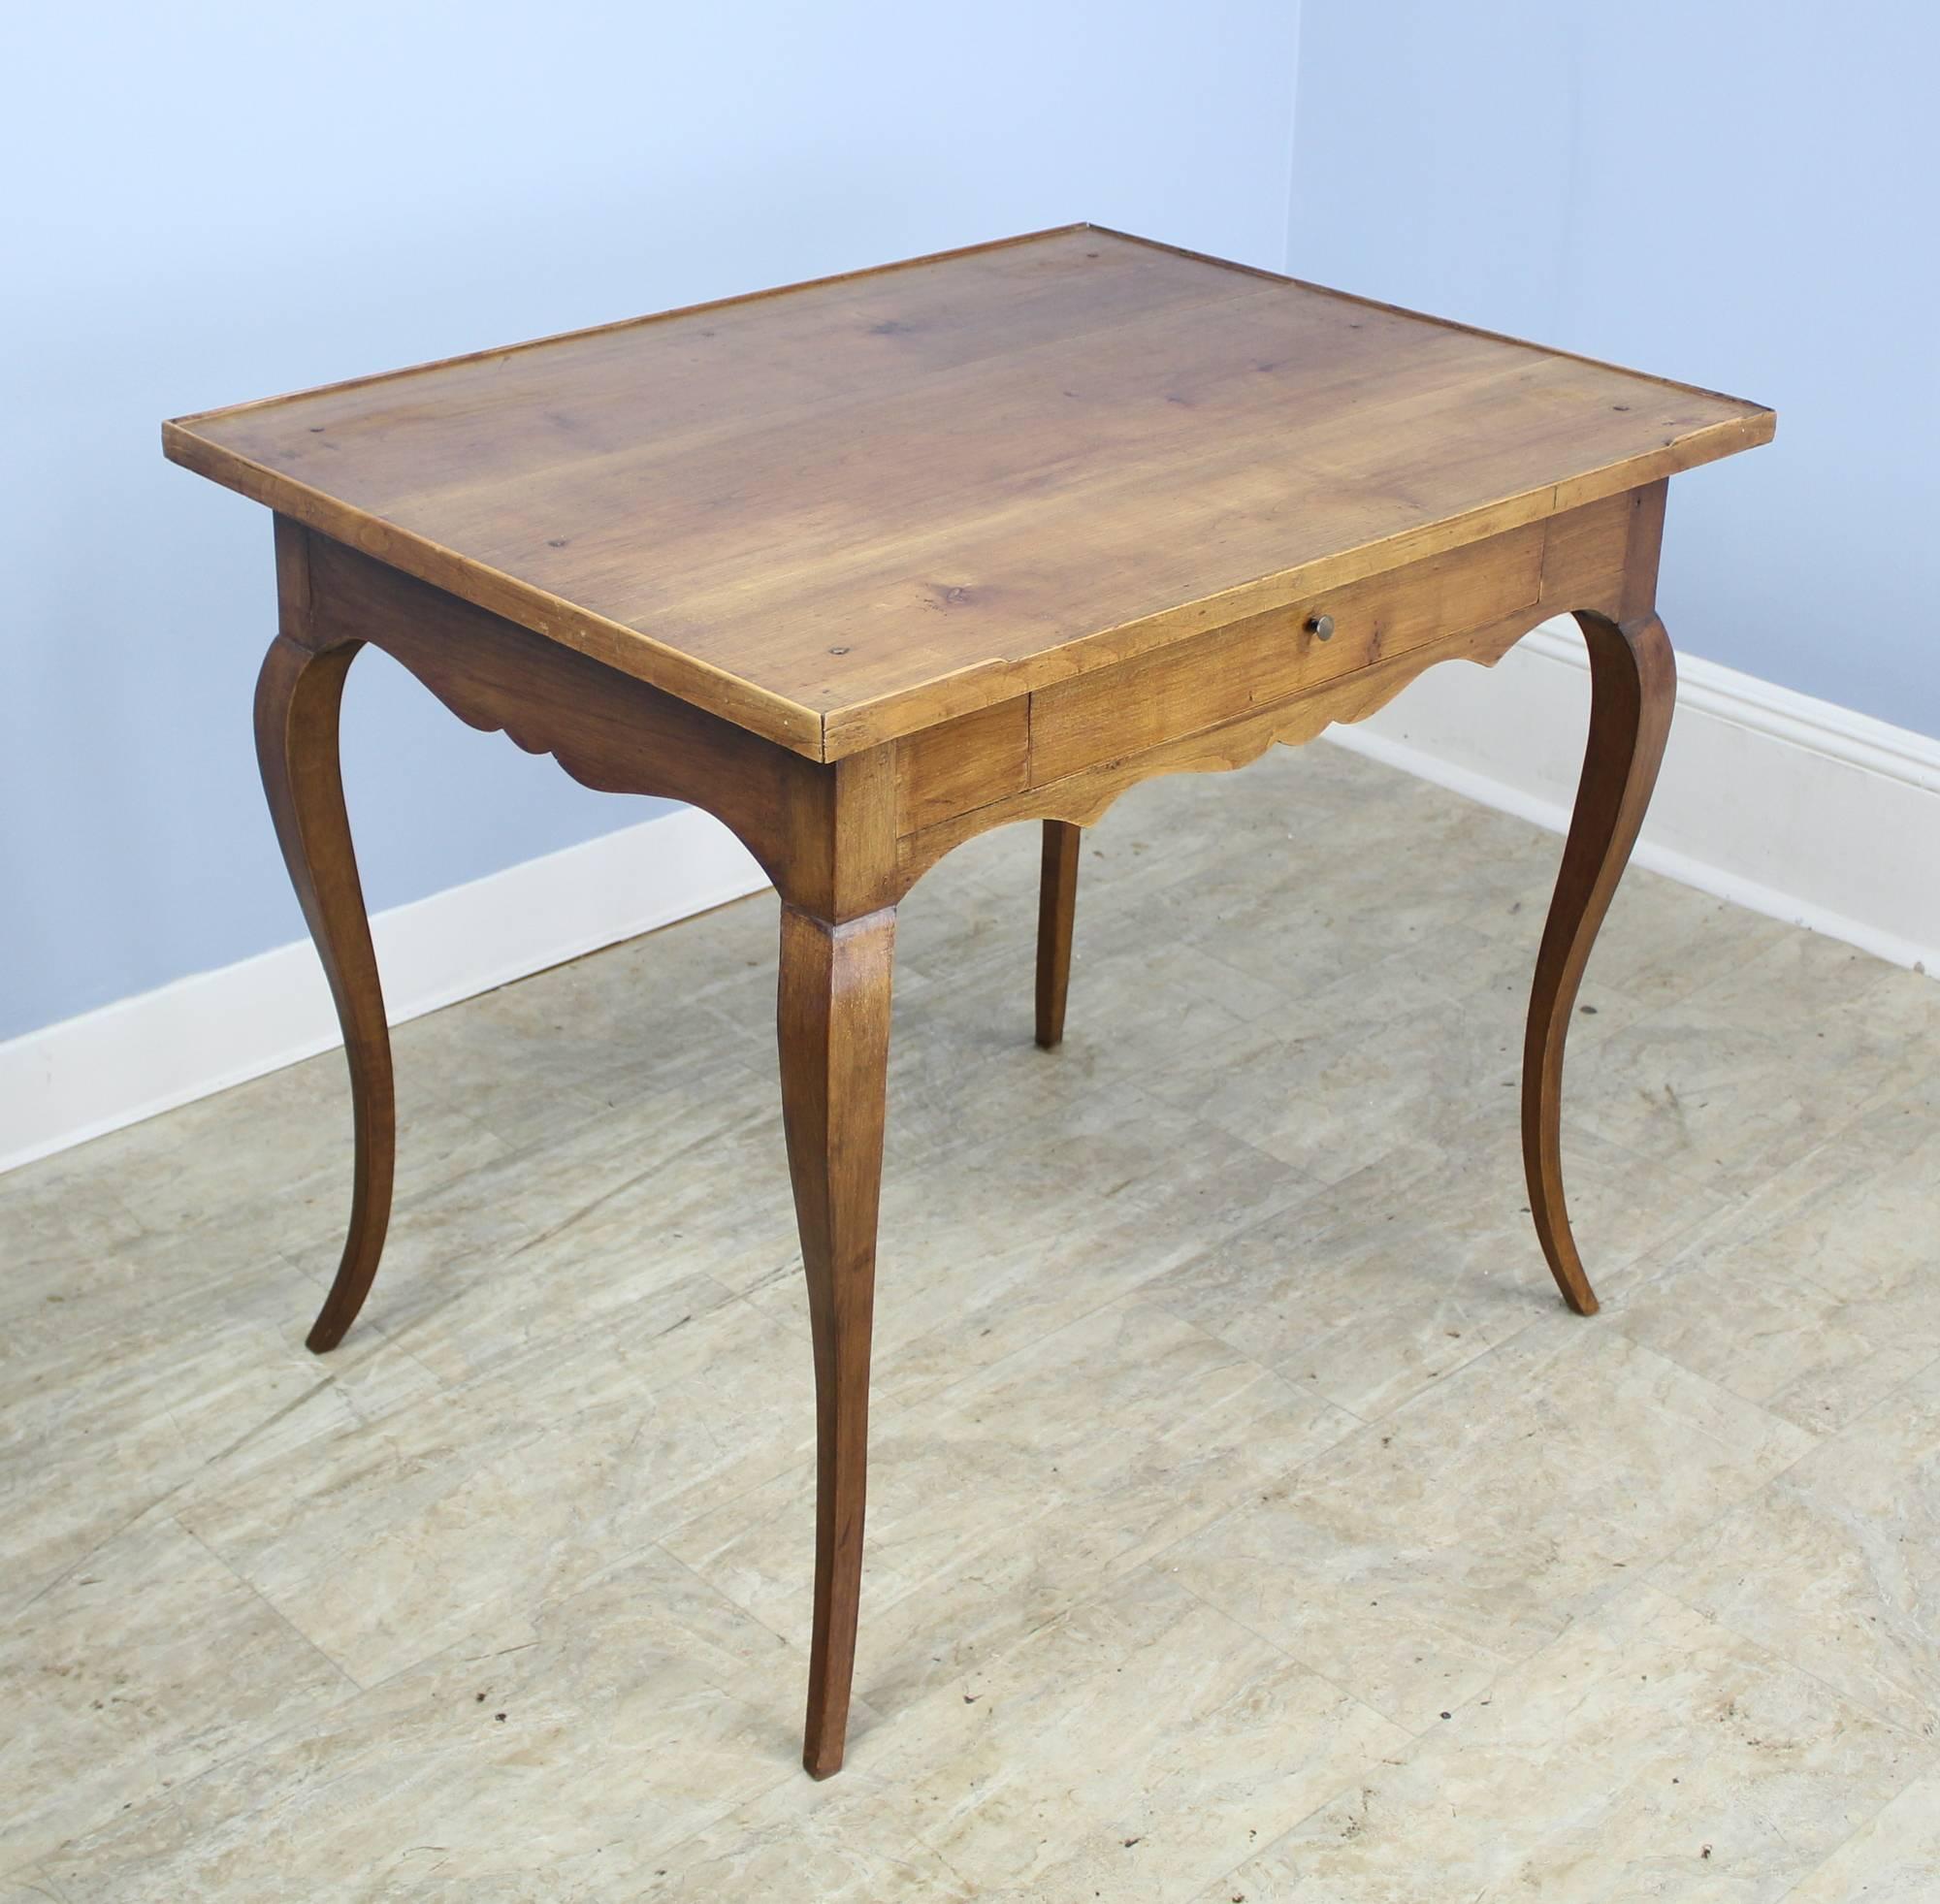 An elegant cabriole leg side, lamp, or occasional table in mellow walnut. The top has a slight galleried edge which adds a note of interest. The color and patina on this piece are very good. Single drawer slides easily.